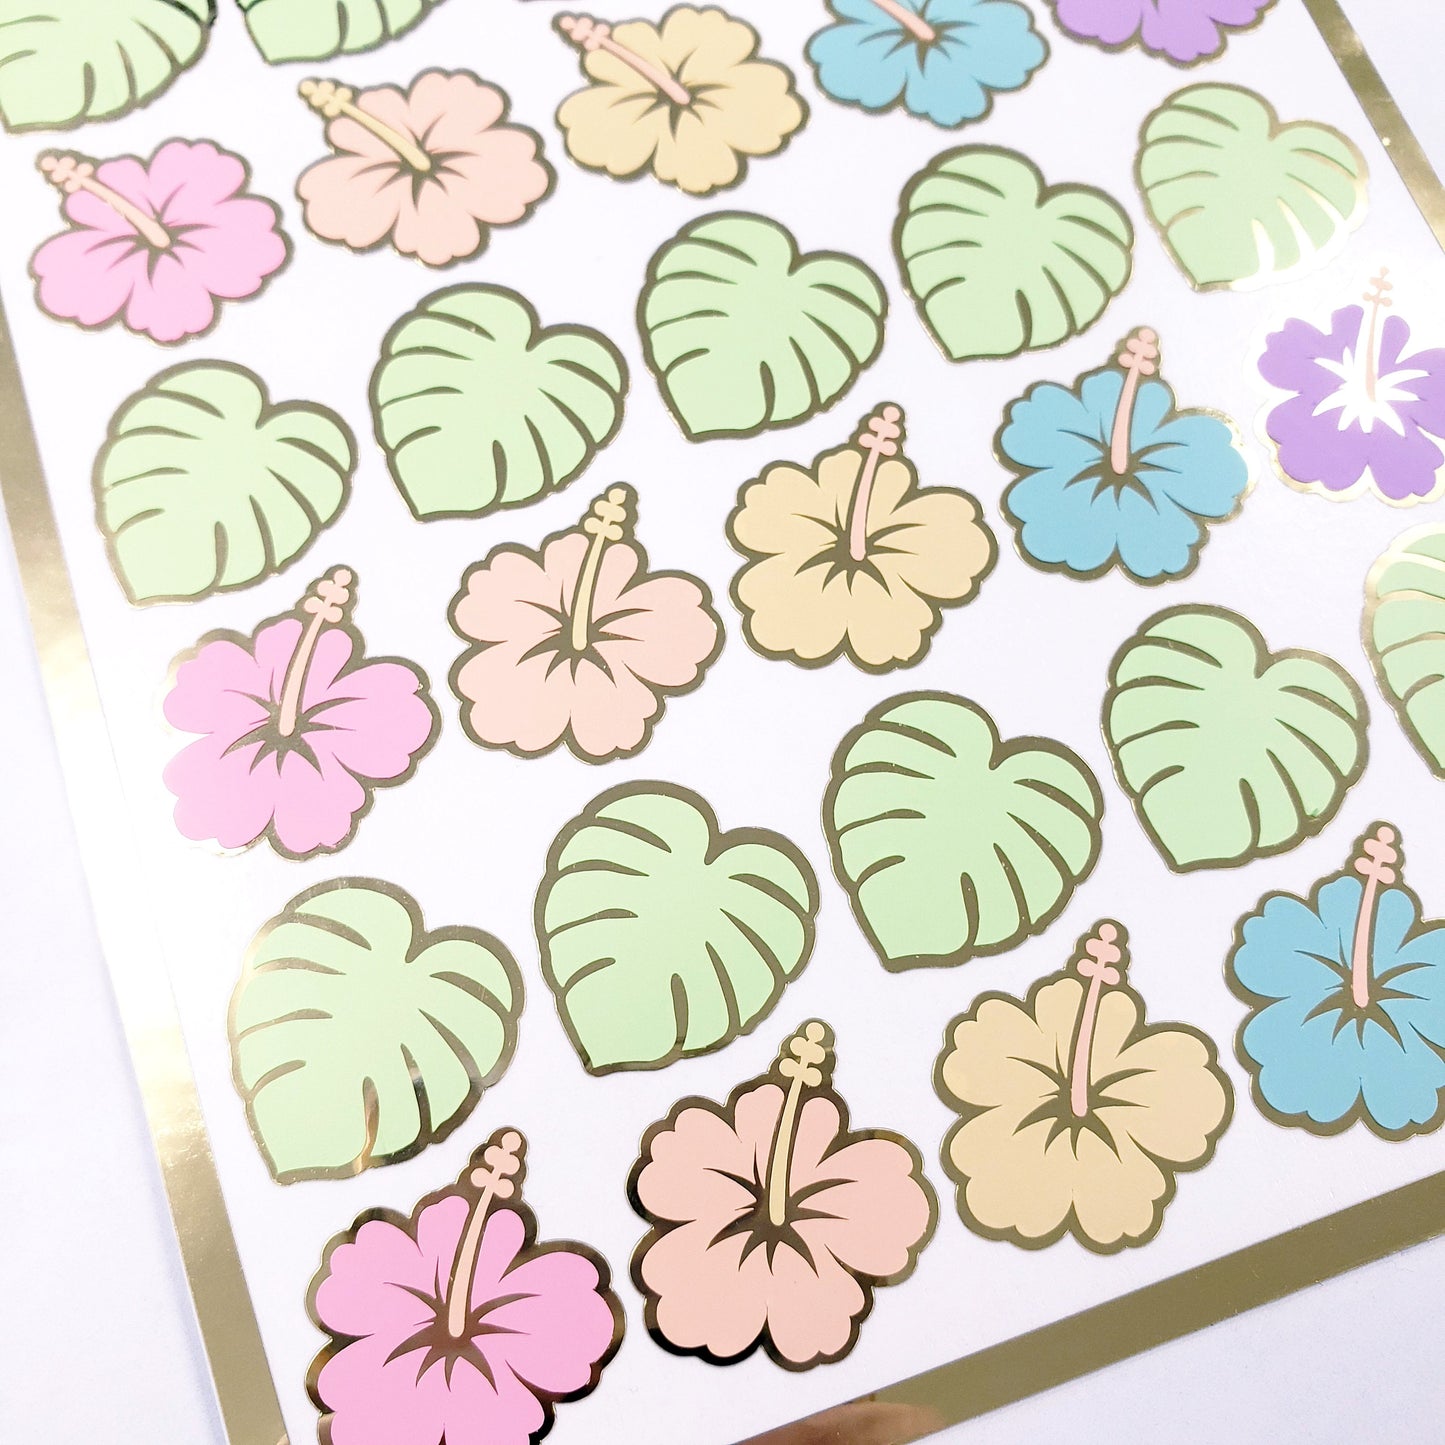 Tropical Flower Stickers, set of 20 hibiscus blooms and 15 monstera leaf stickers for journals, scrapbook pages, stationery and envelopes.